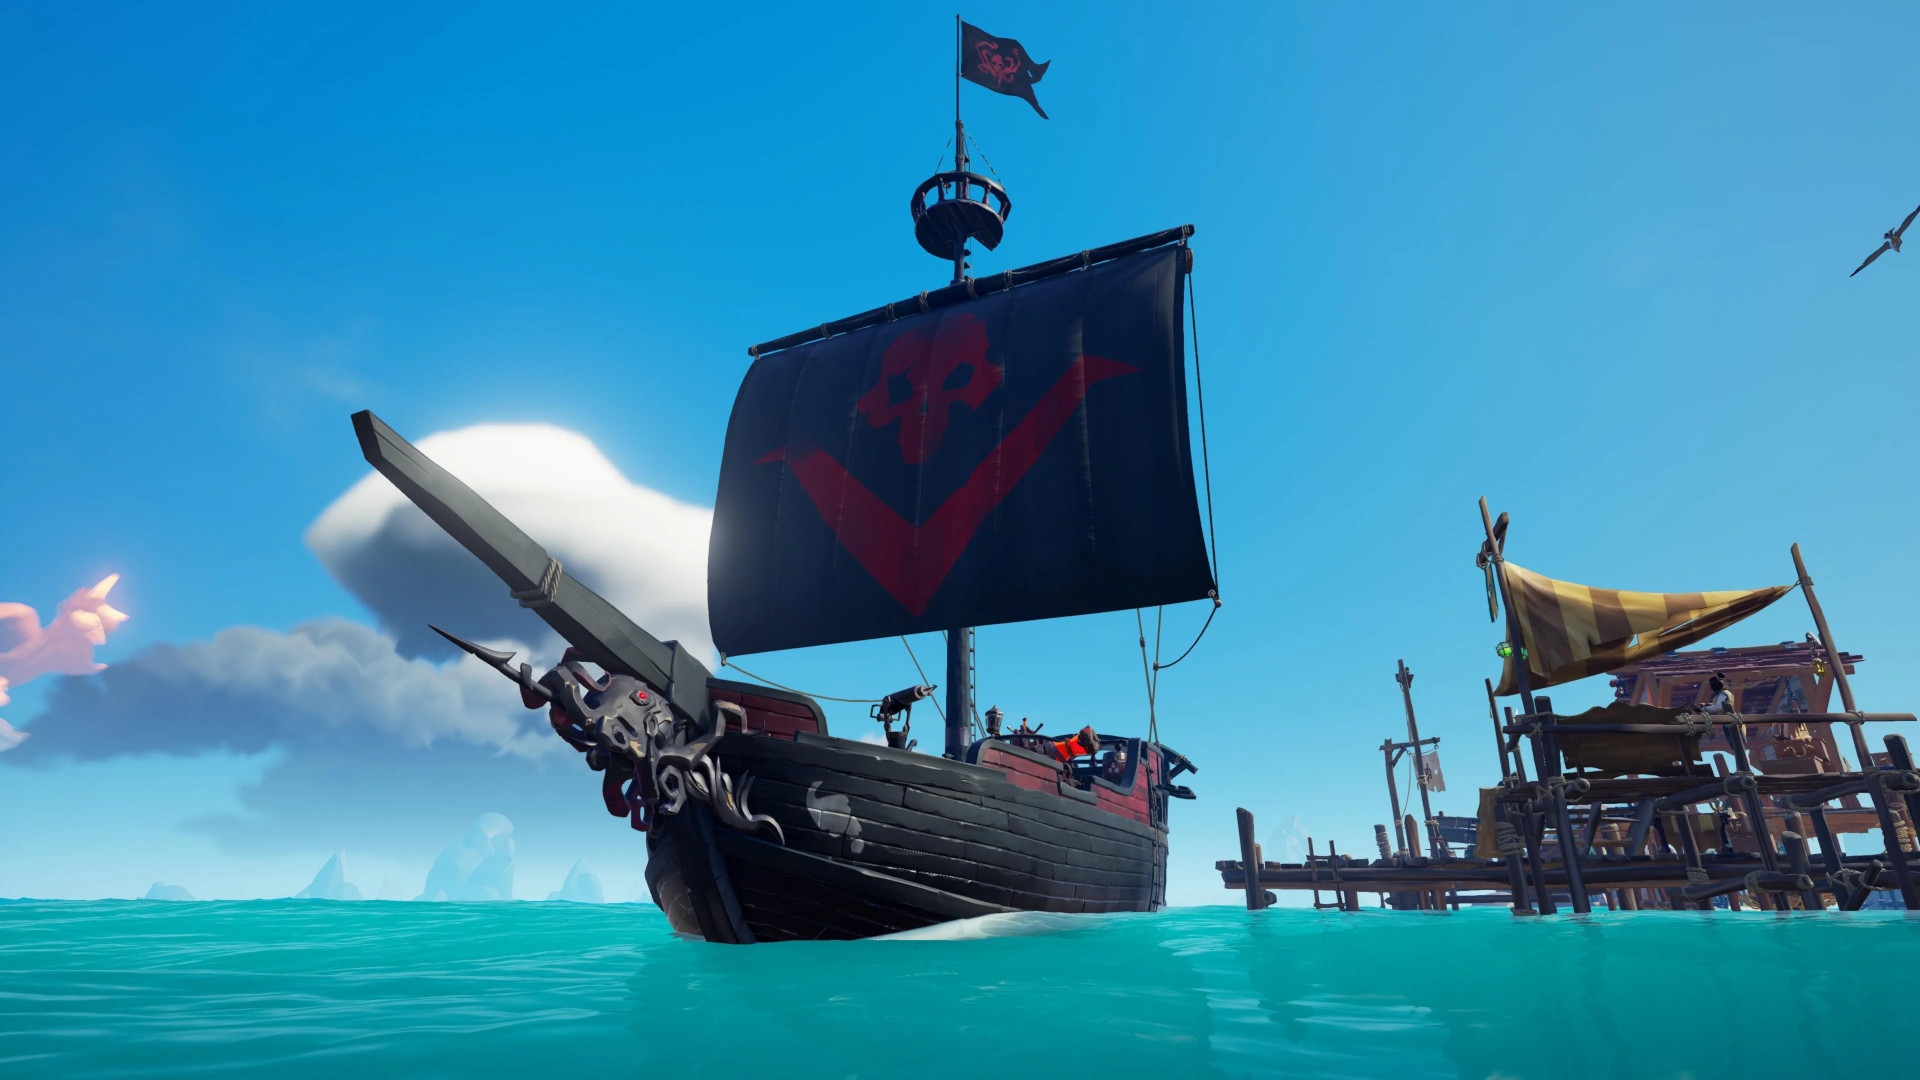 Sea of Thieves - Sails of the Bonny Belle DLC XBOX One / Windows 10 CD Key 89.27$